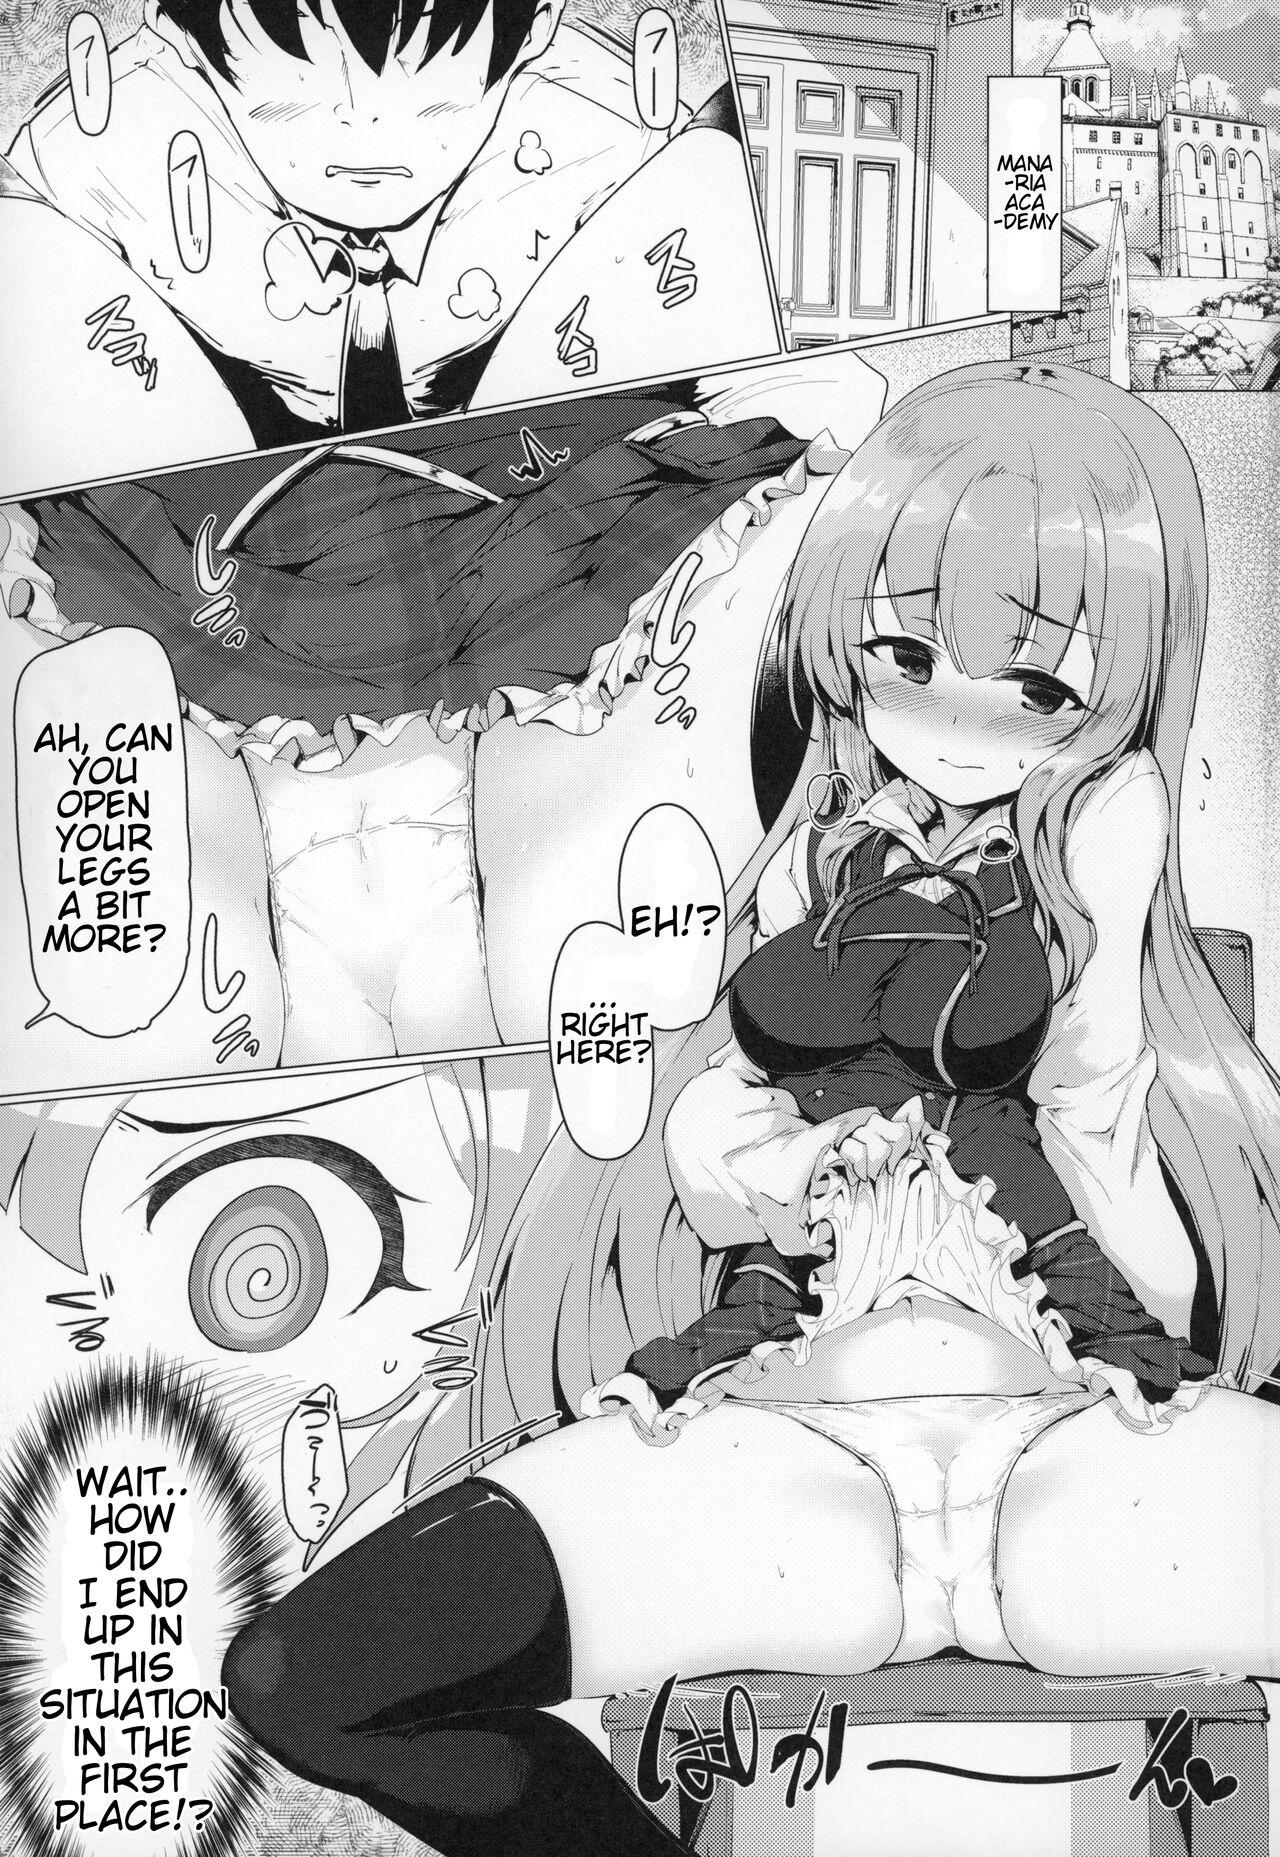 Fat There's No Way An Ecchi Event Will Happen Between Me and the Princess of Manaria Kingdom! - Manaria friends Foda - Page 4